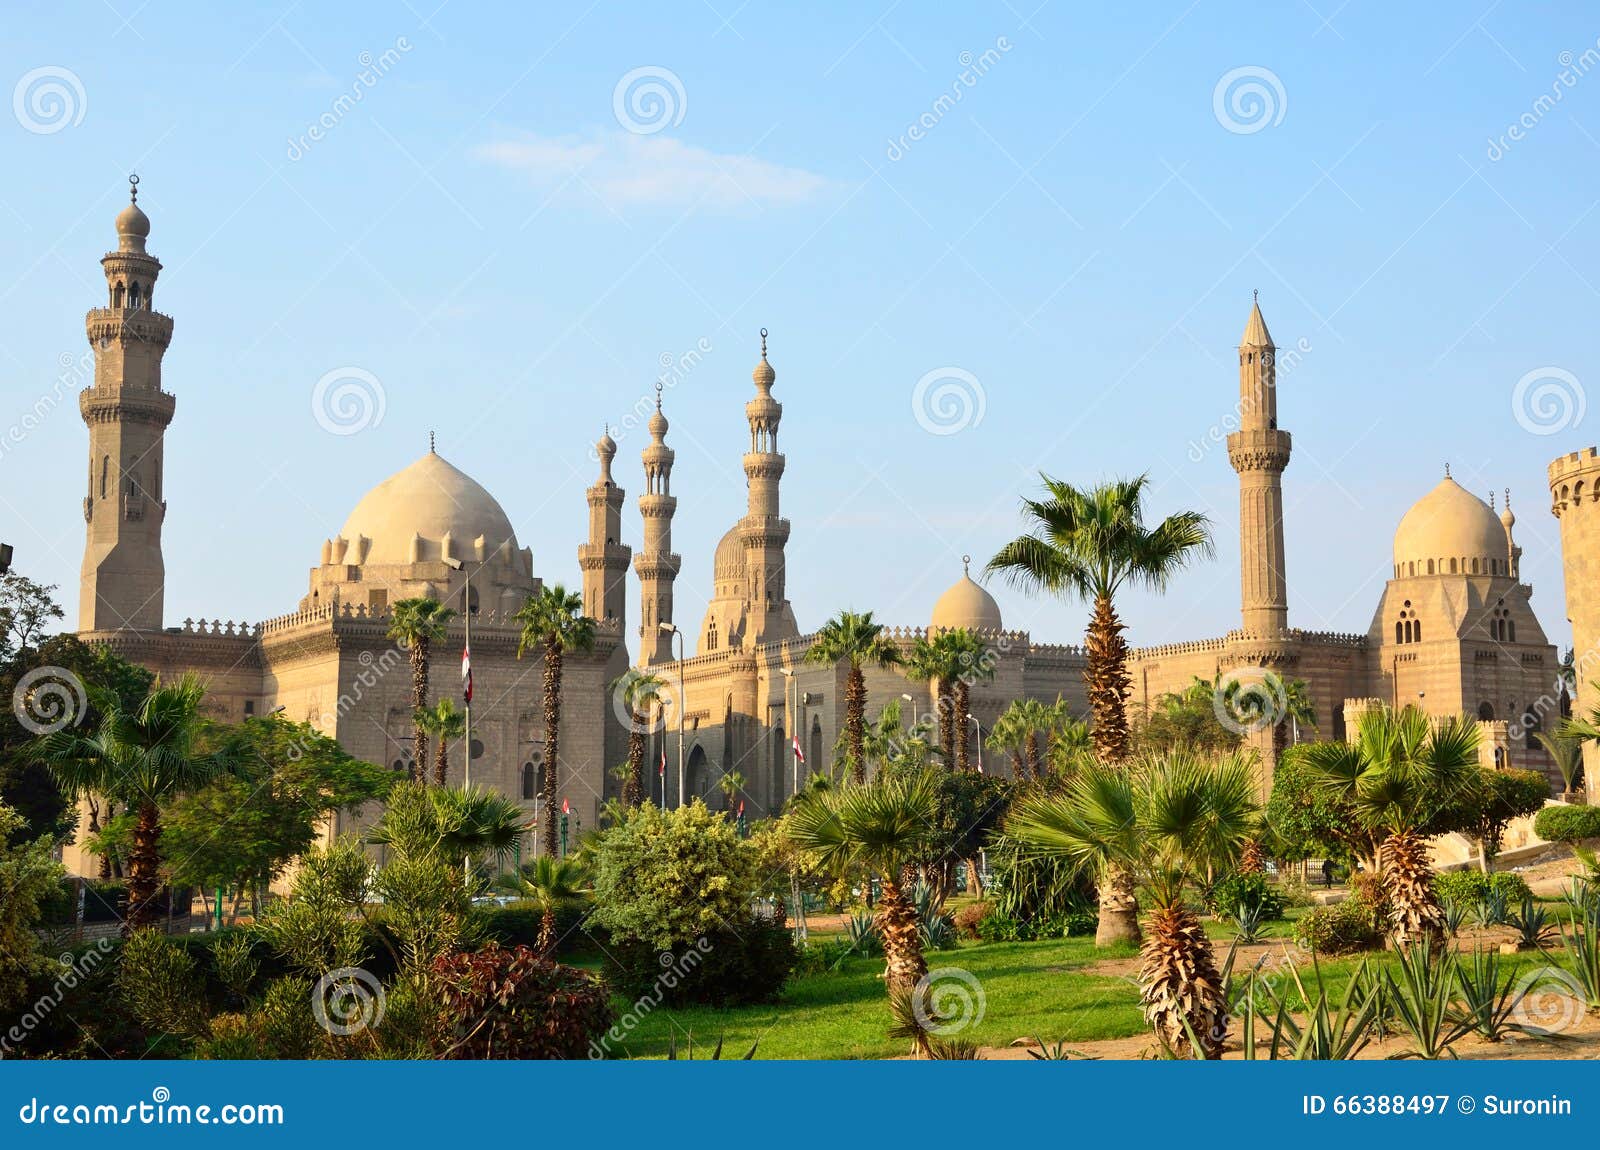 sultan hassan and rifai mosques